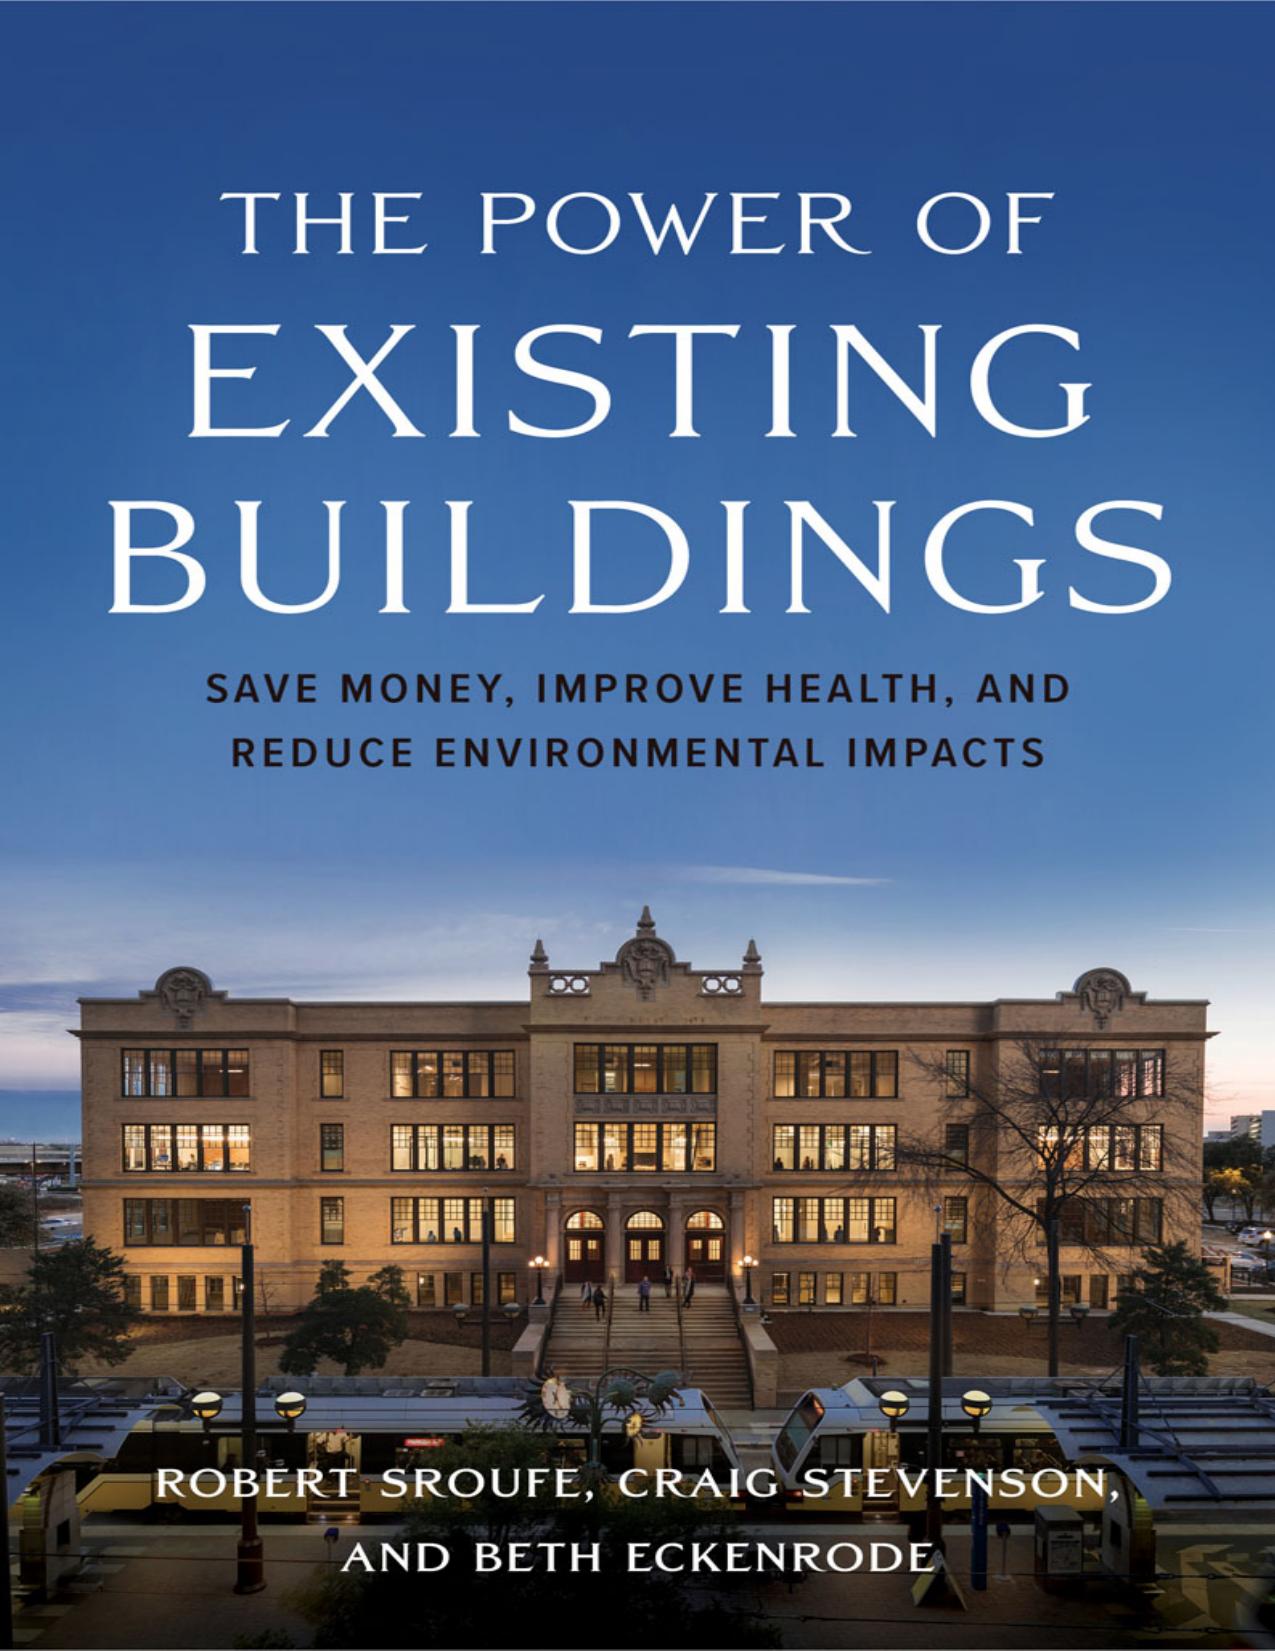 The Power of Existing Buildings by Robert Sroufe Jr